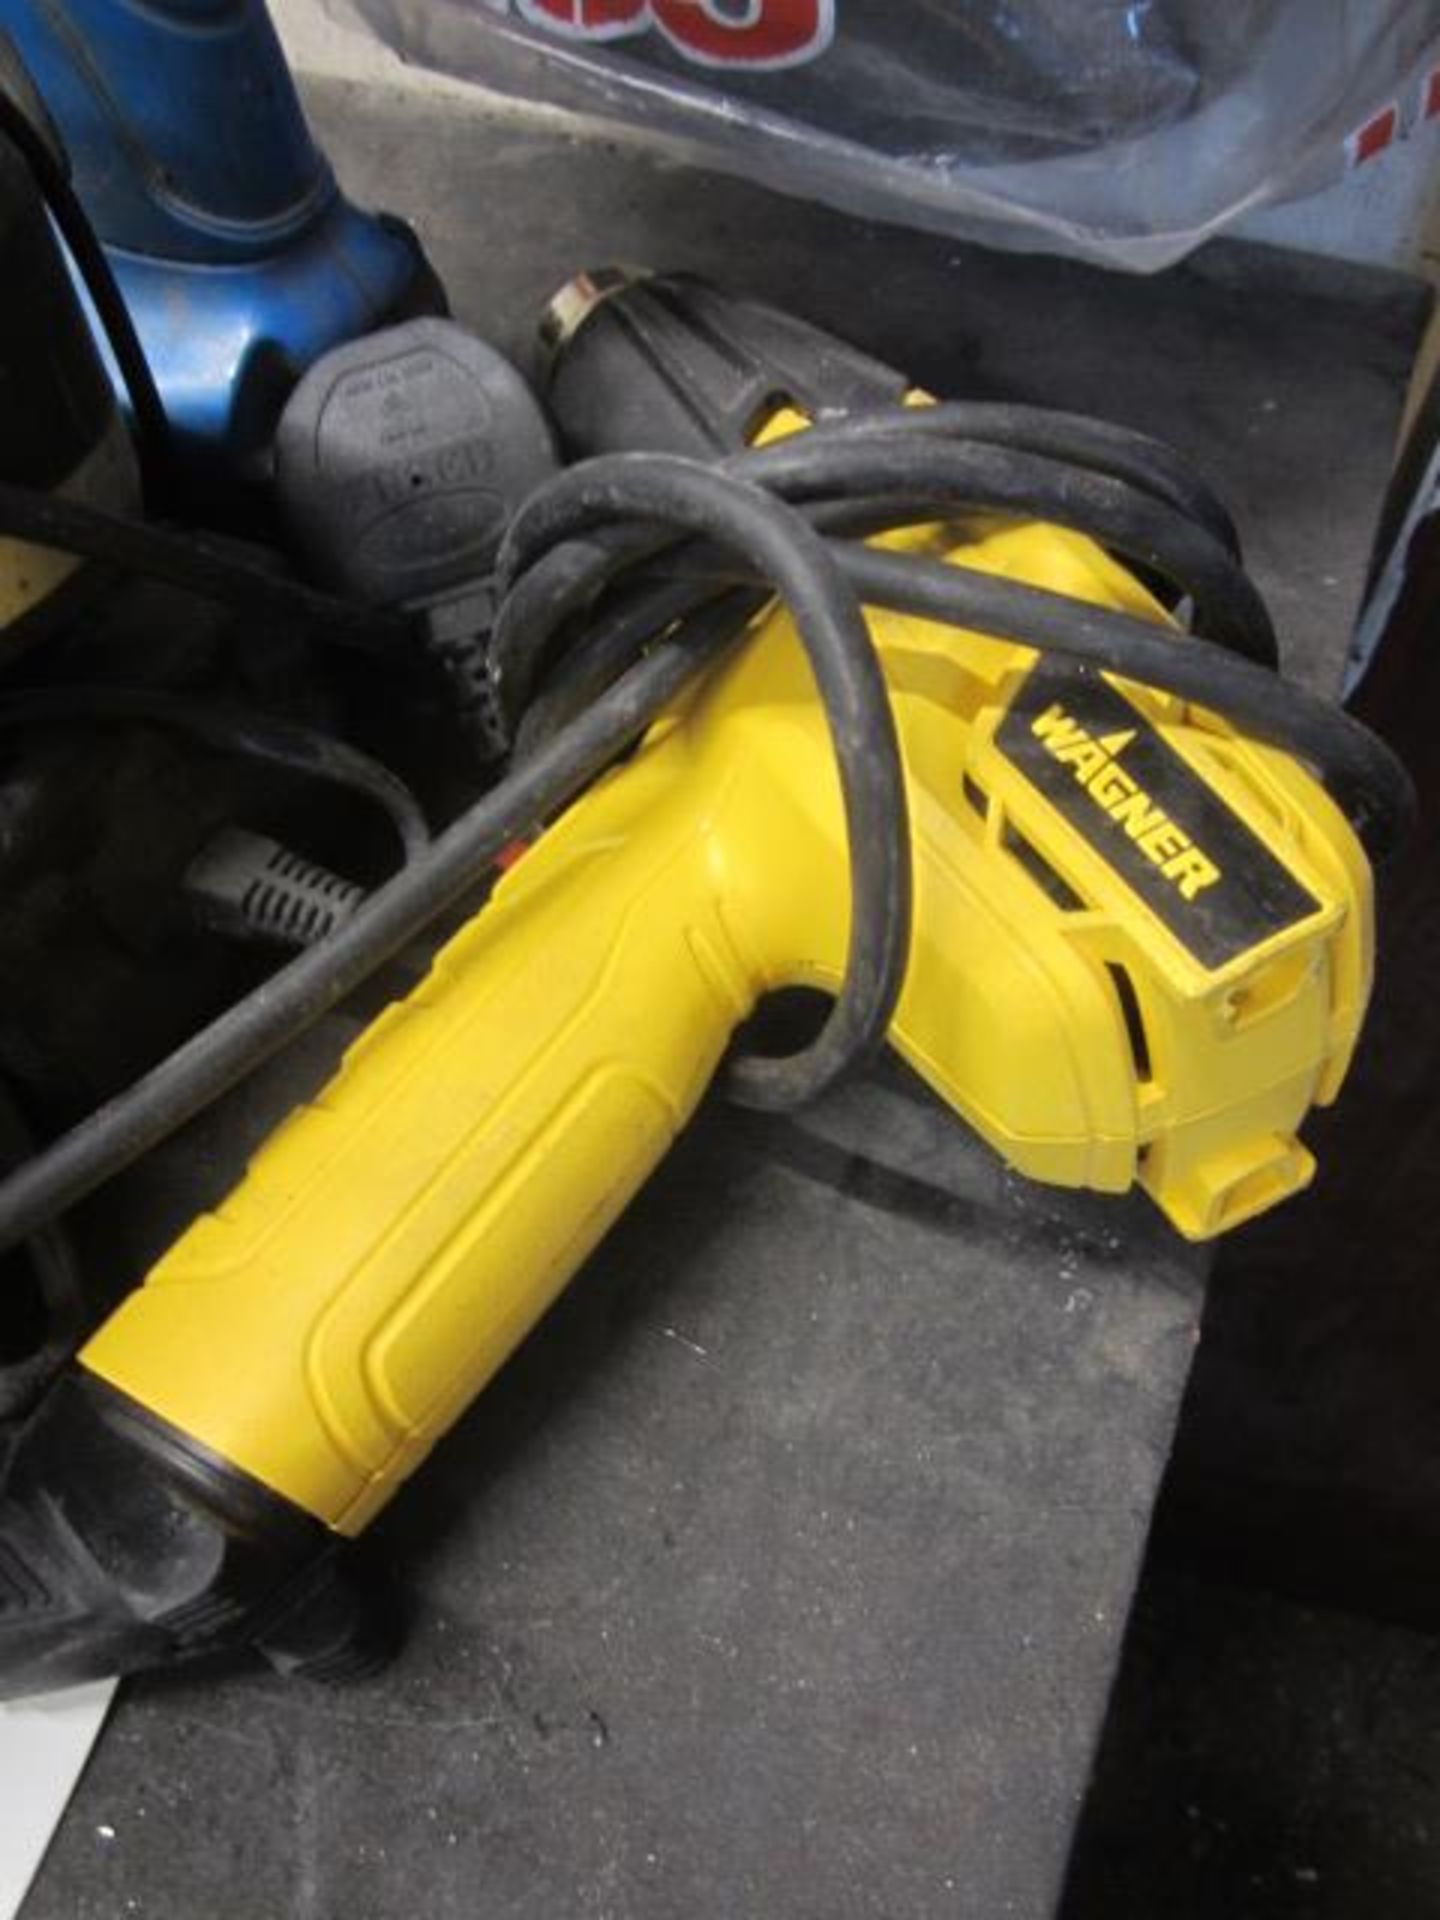 Draper cordless drill, 2 x batteries/chargers, 1 x Wagner hot air gun, 240v. Located at Supreme - Image 3 of 3